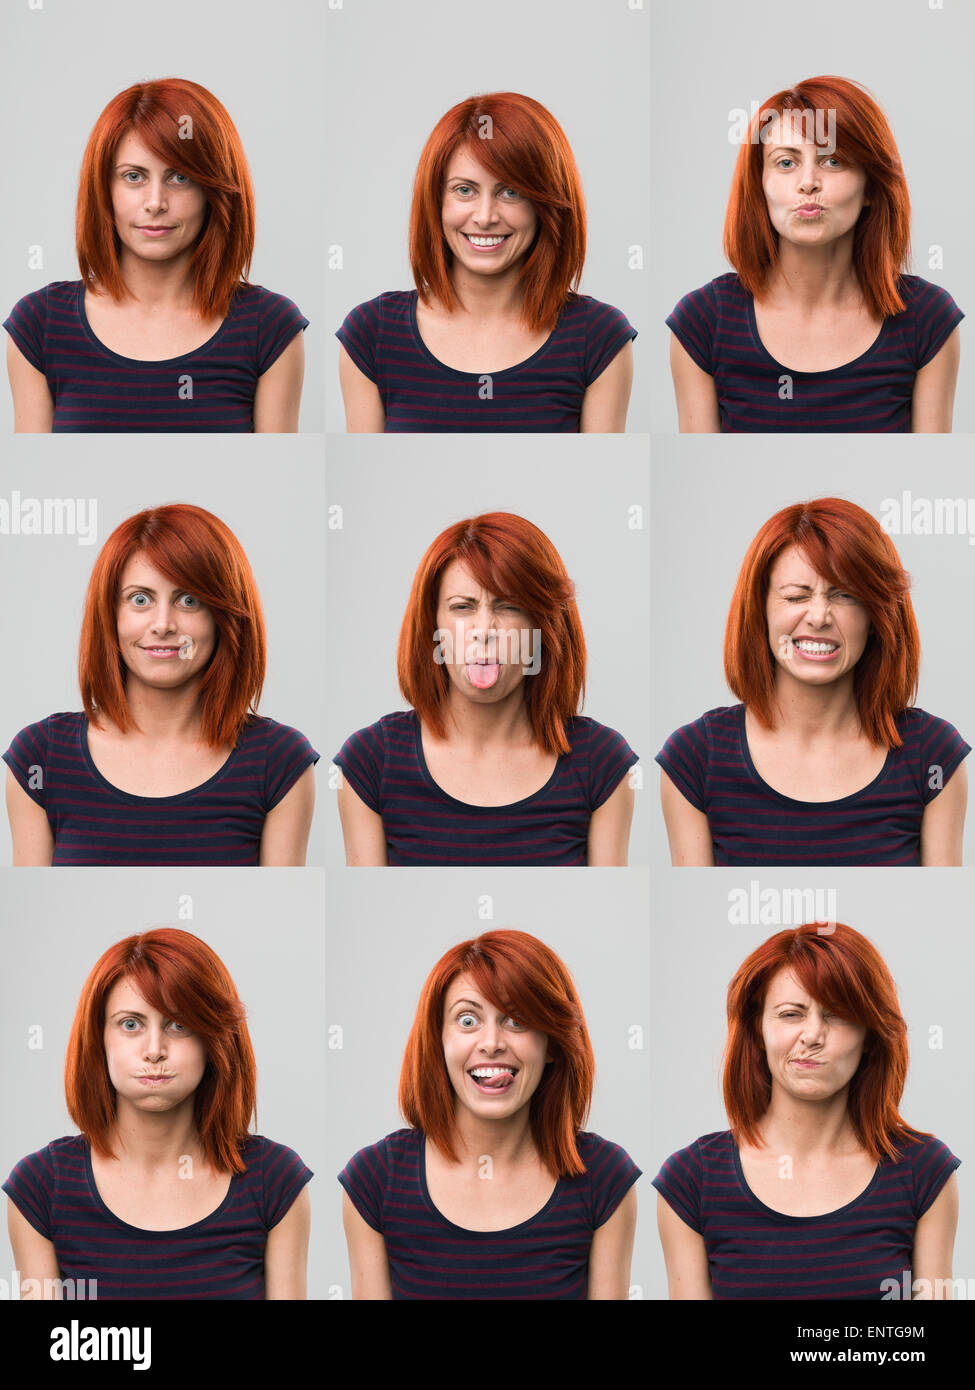 young woman making facial expressions Stock Photo